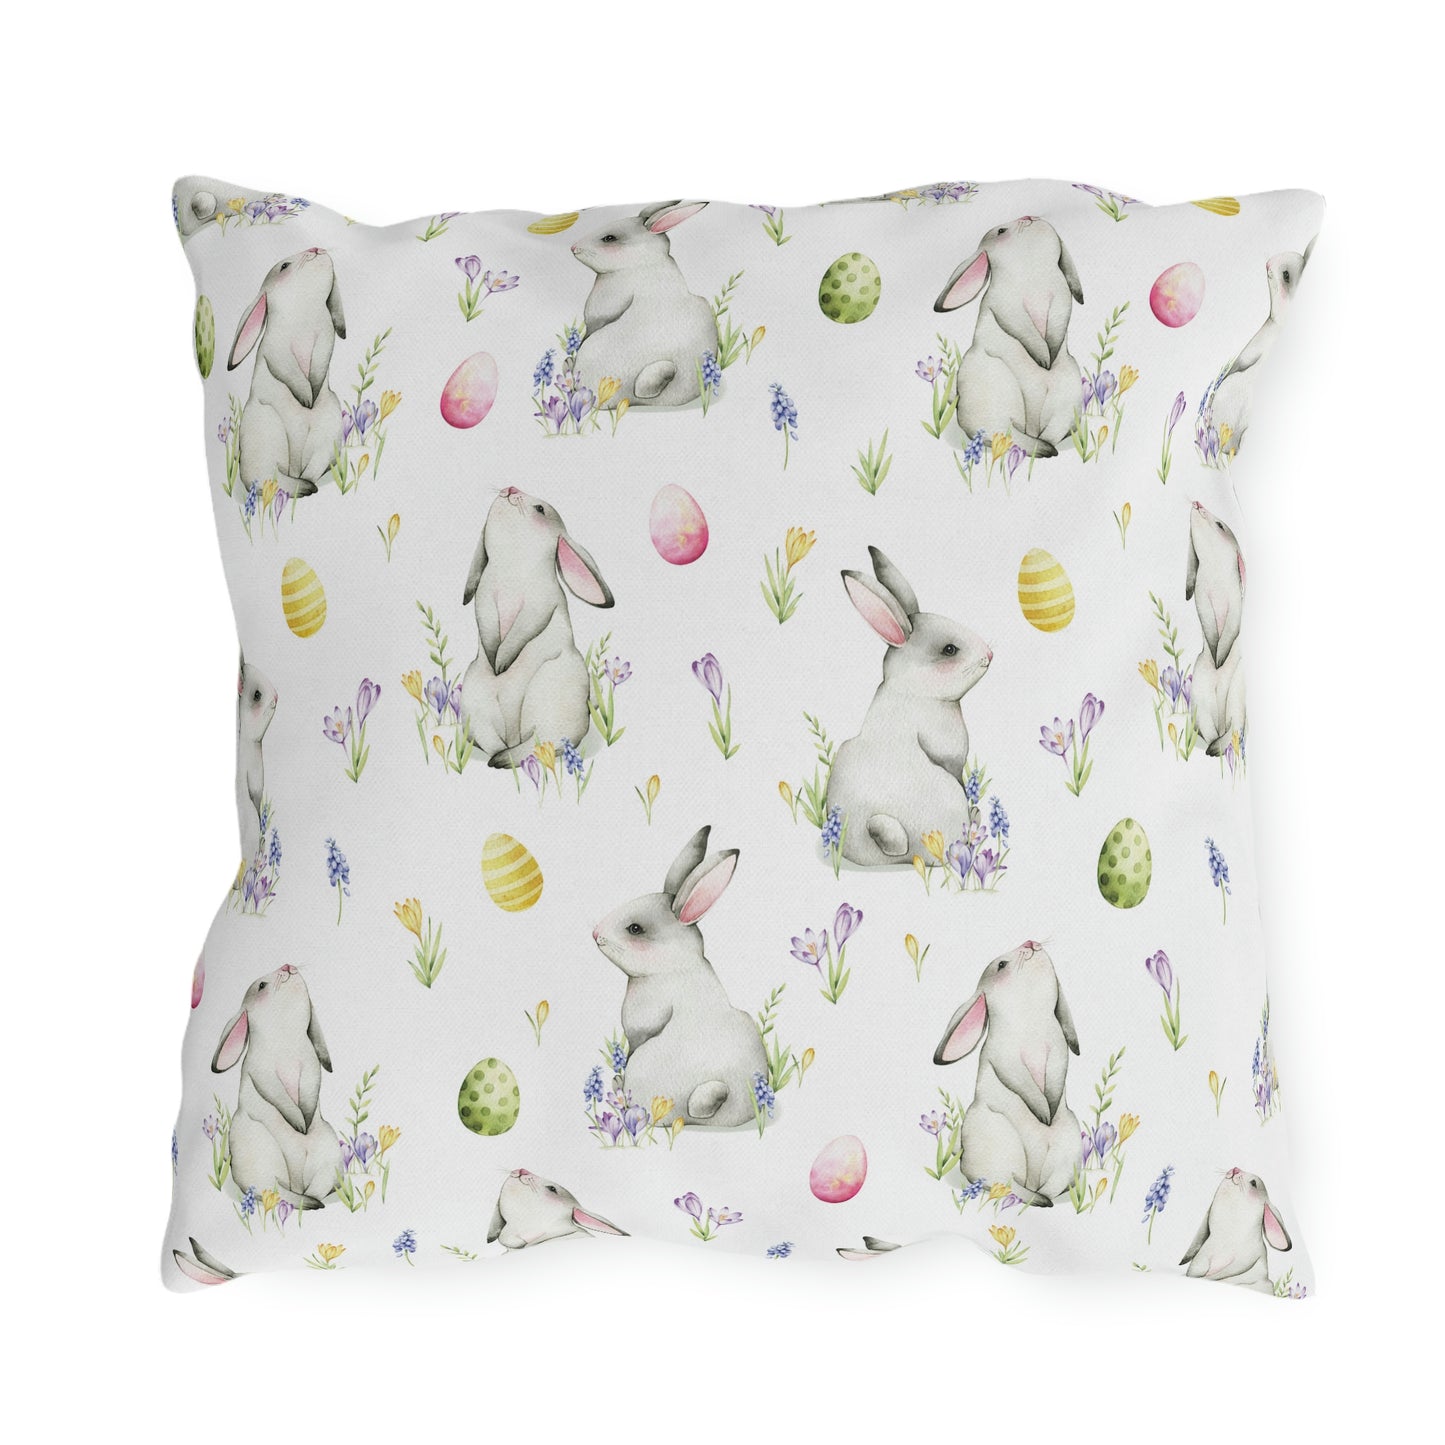 Cottontail Bunnies and Eggs Outdoor Pillow